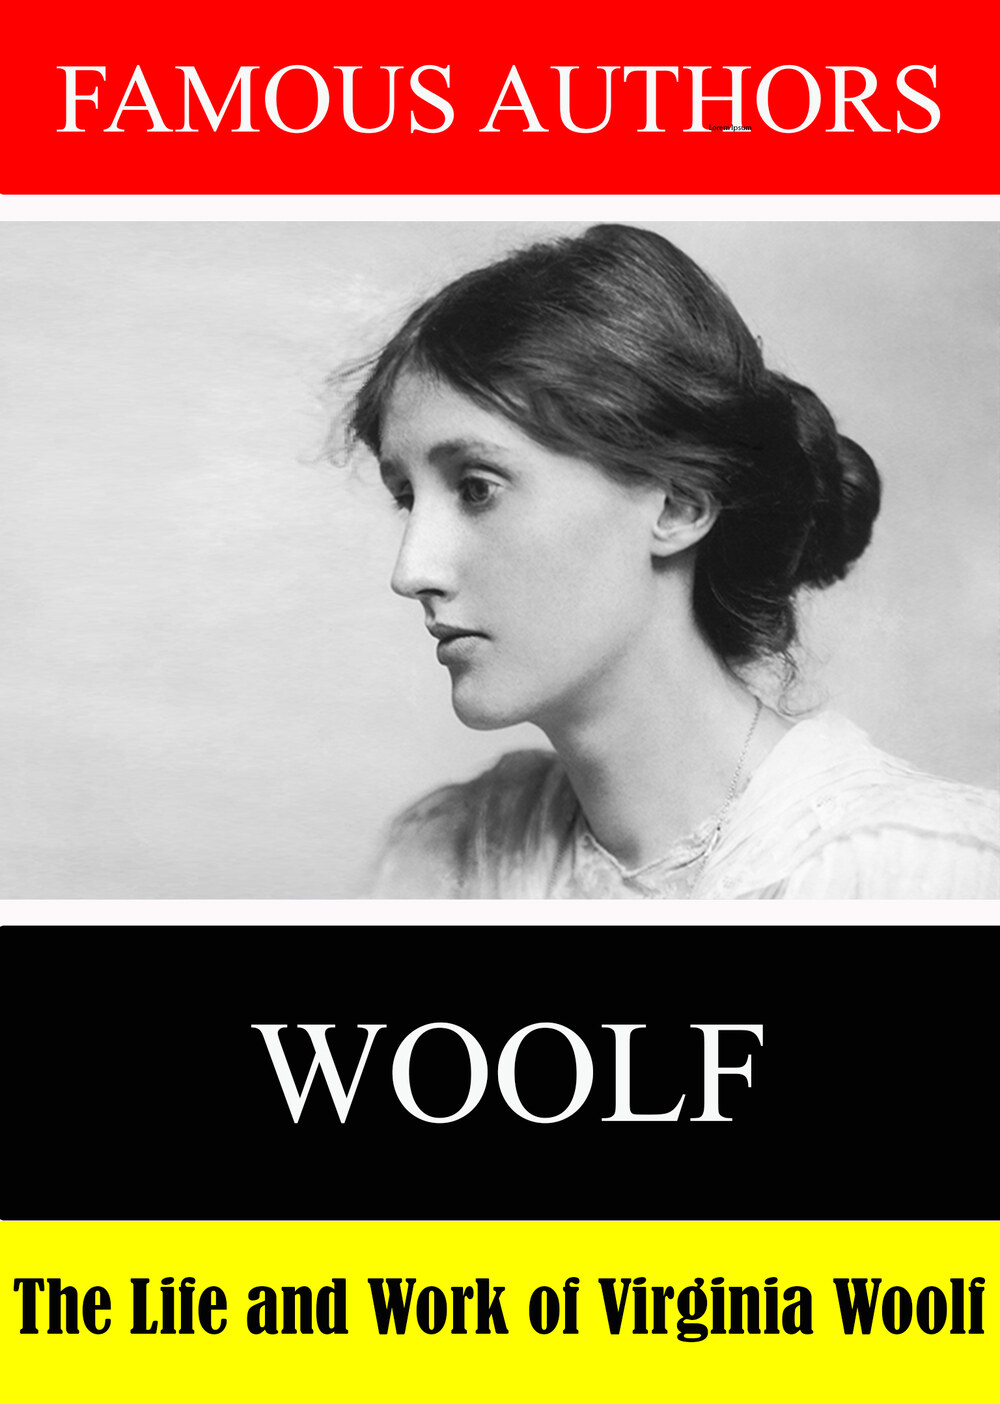 L7913 - Famous Authors: The Life and Work of Virginia Woolf